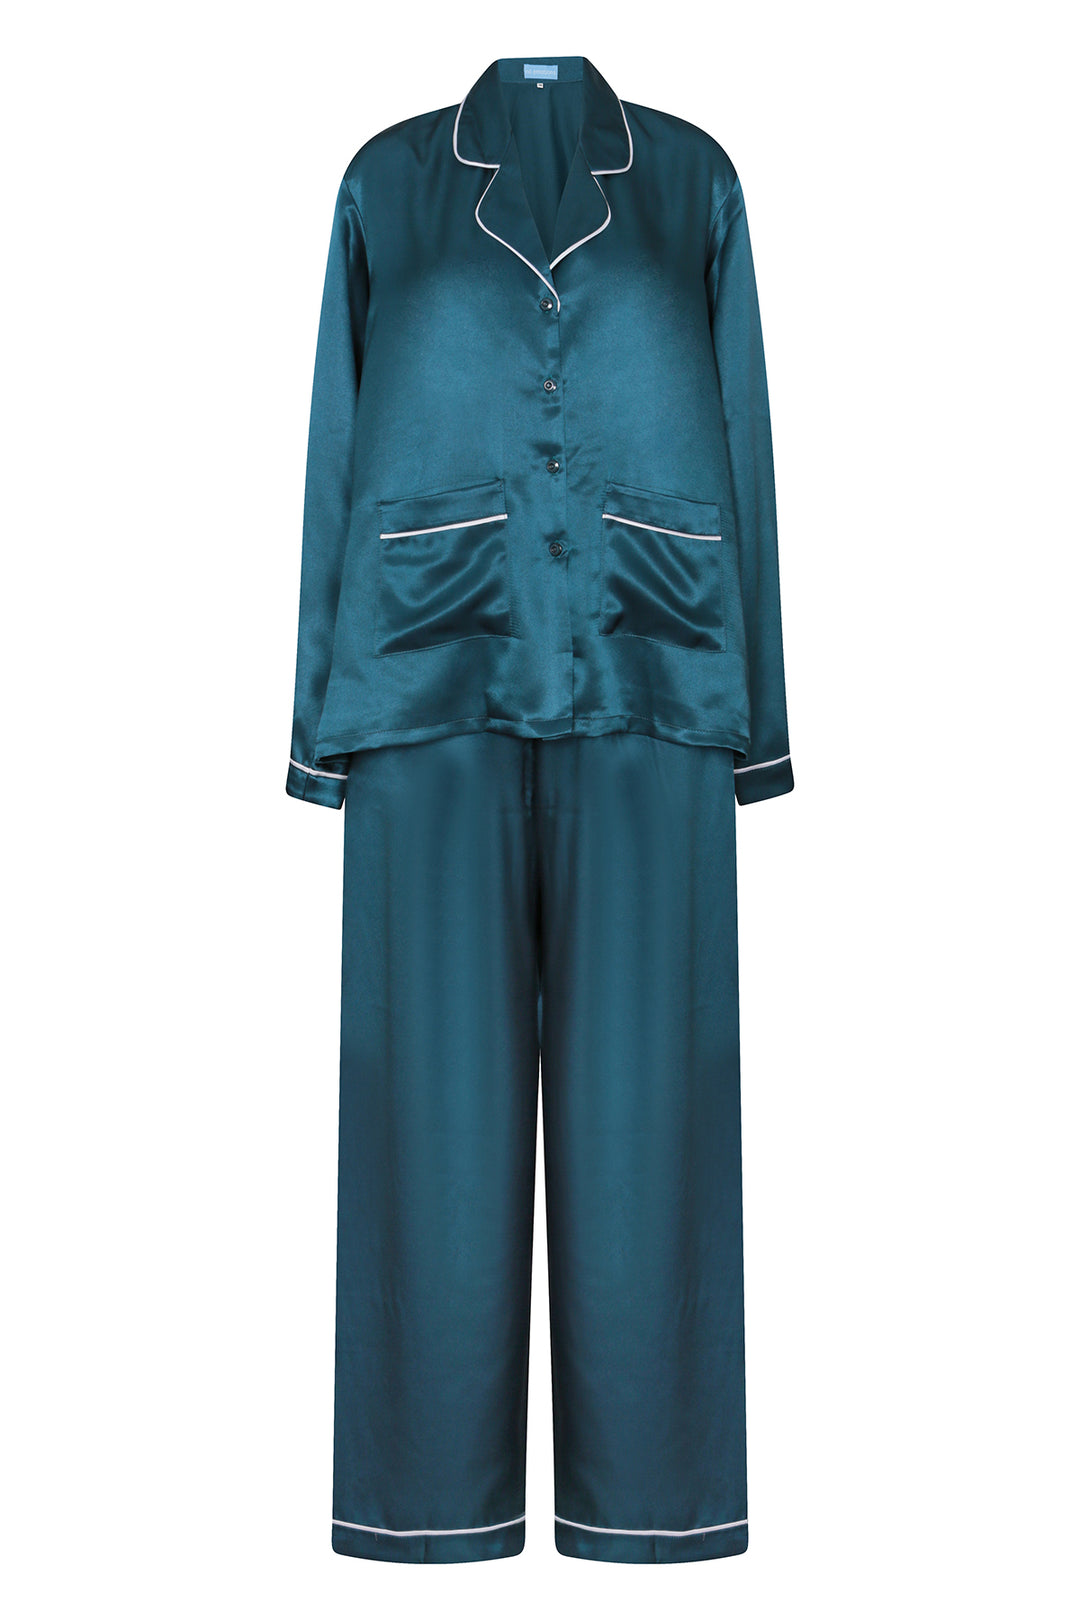 blue silk pyjamas with white pipping, worn in London